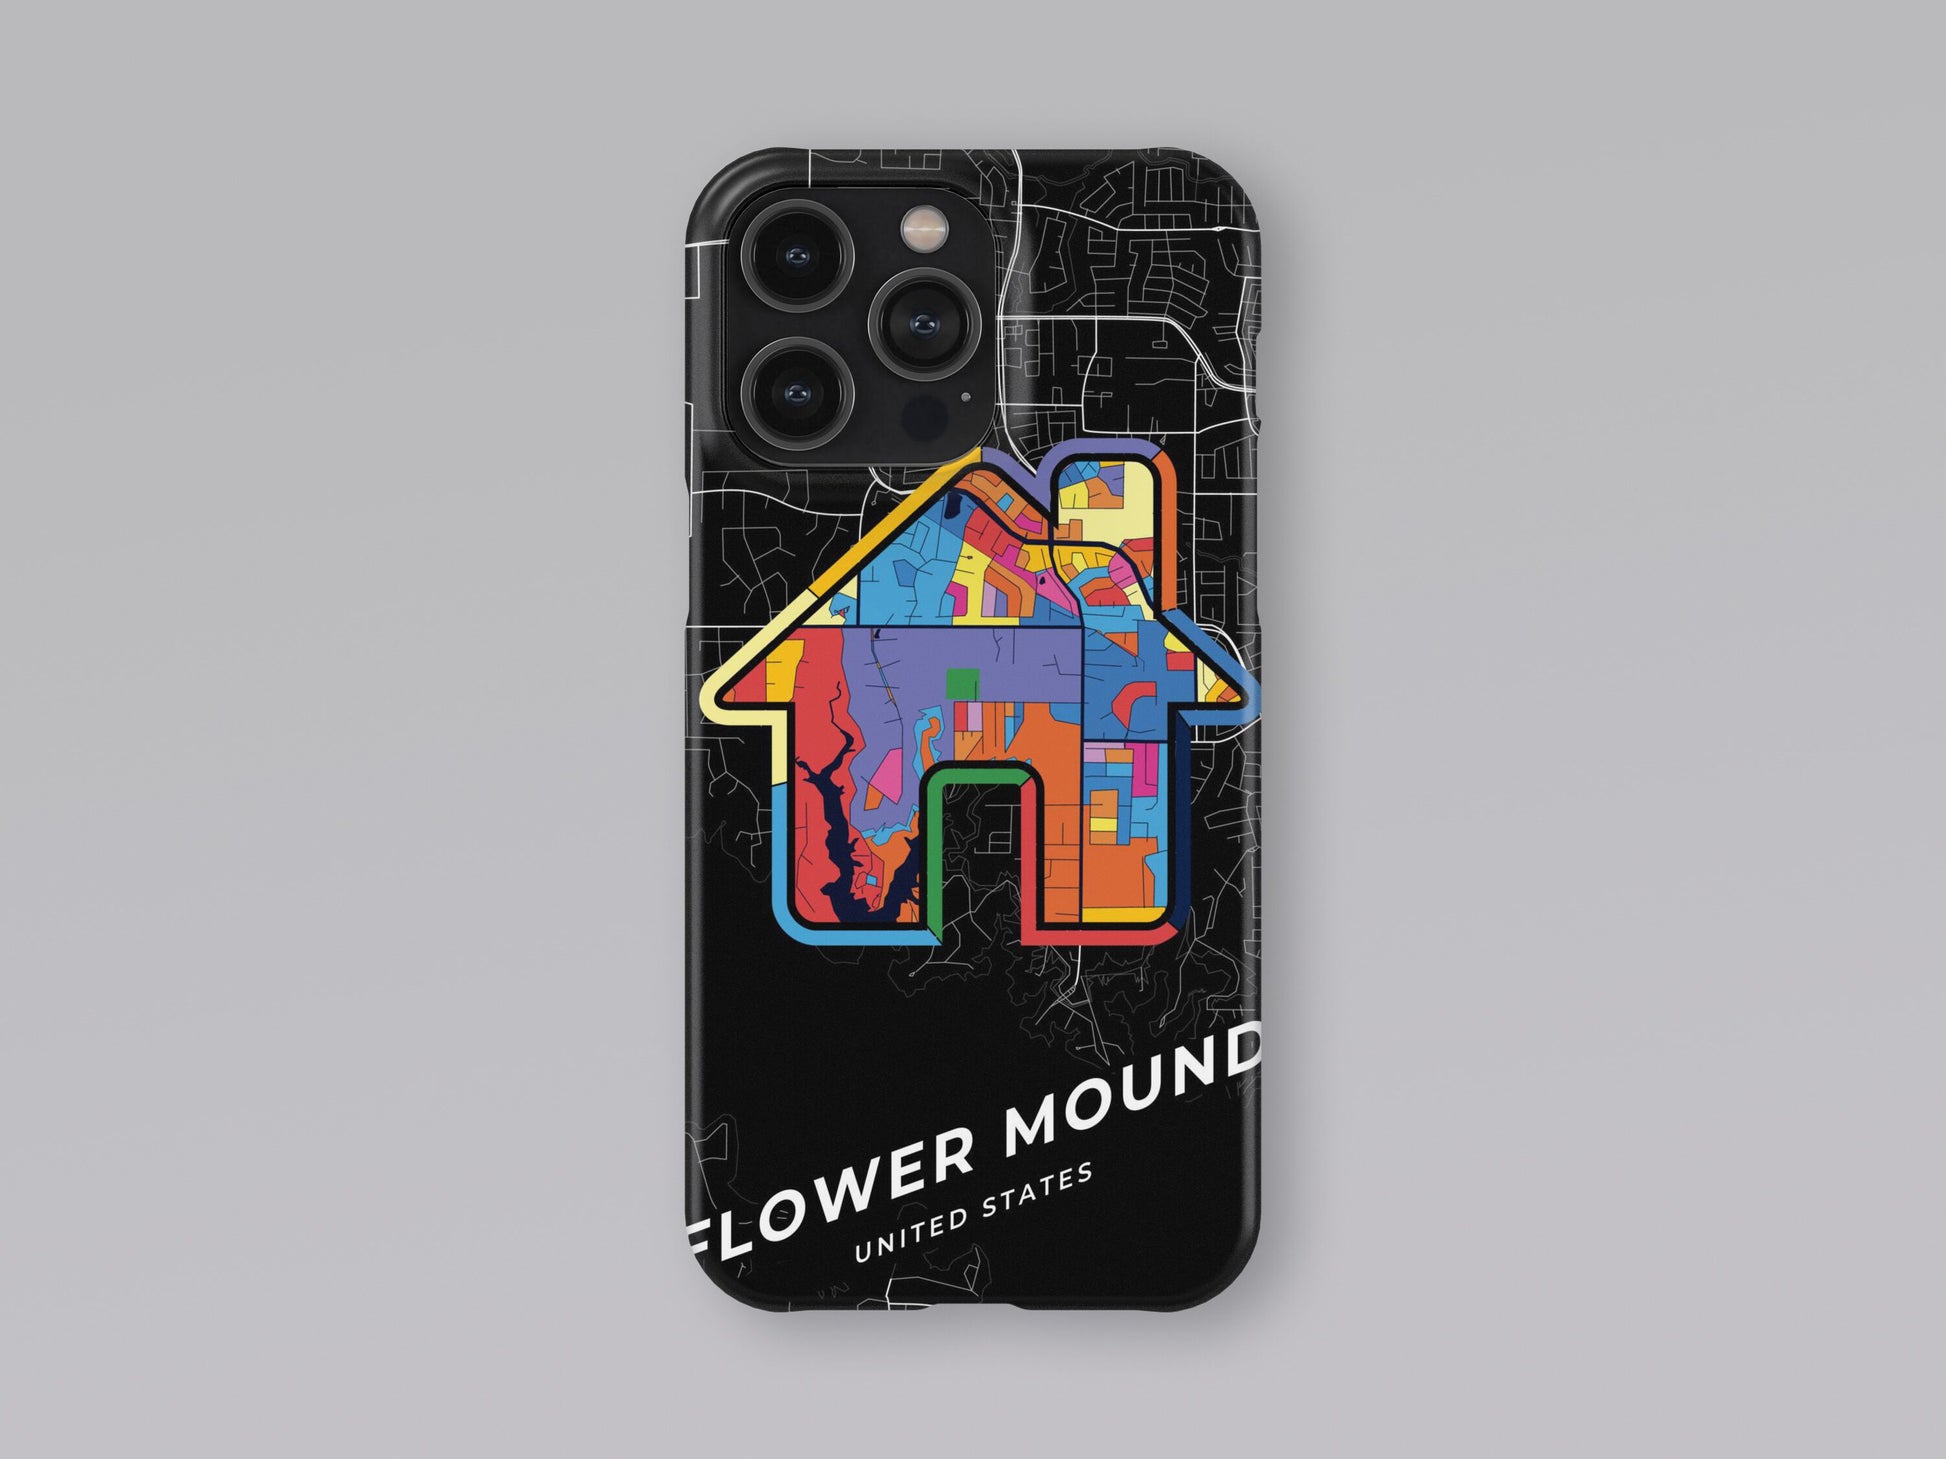 Flower Mound Texas slim phone case with colorful icon. Birthday, wedding or housewarming gift. Couple match cases. 3